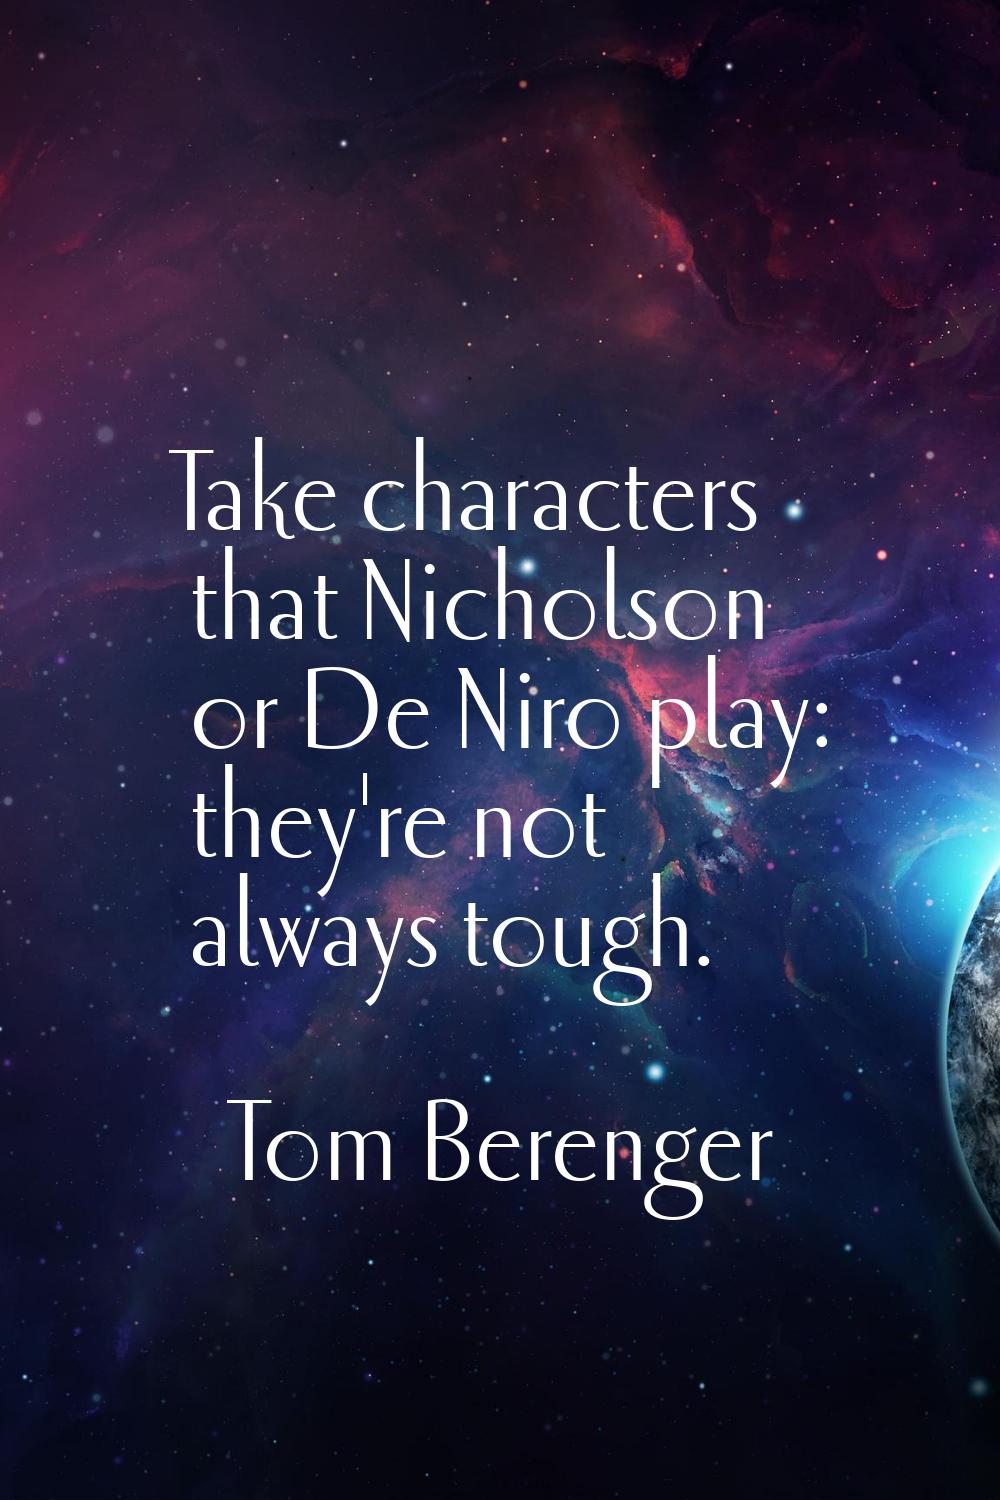 Take characters that Nicholson or De Niro play: they're not always tough.